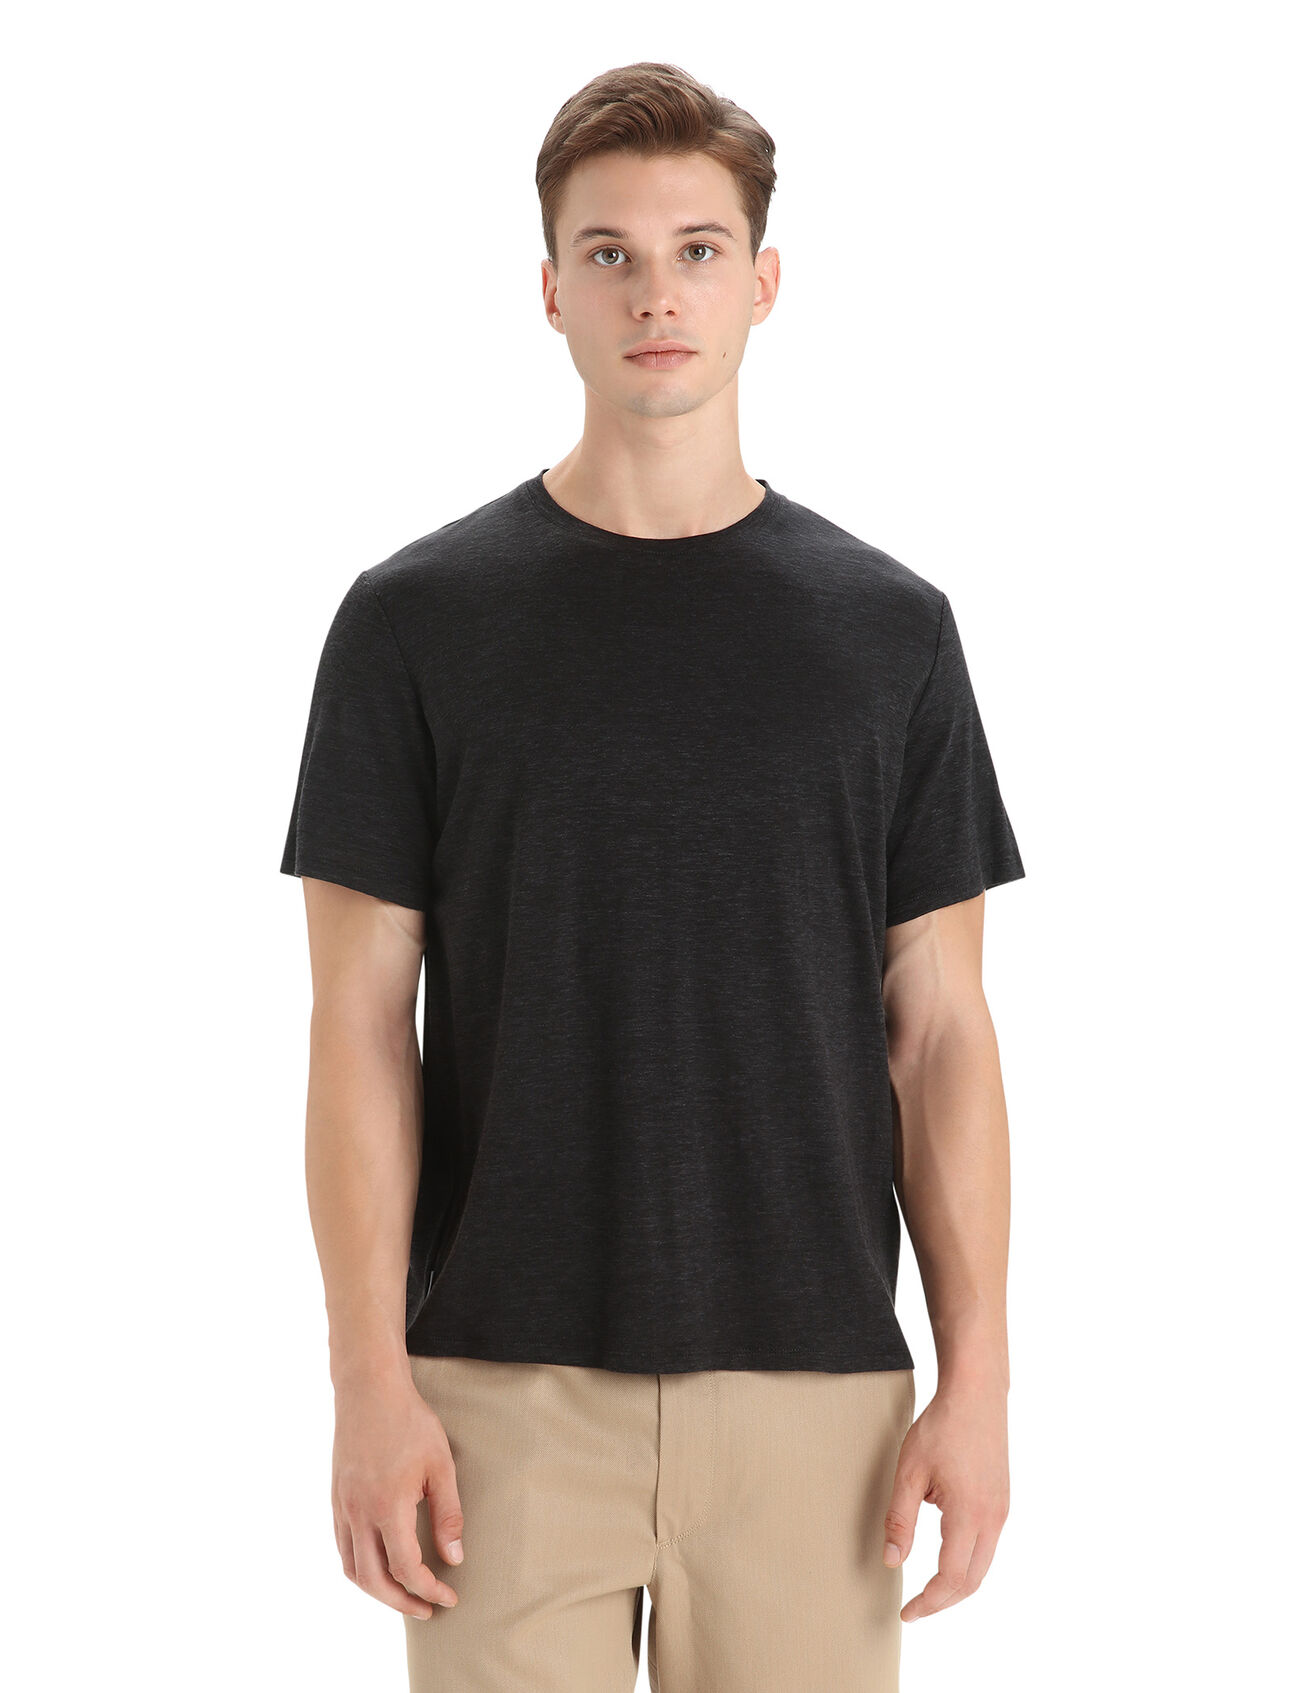 Mens Merino Linen Short Sleeve T-Shirt A lightweight, go-anywhere tee made with a soft blend of merino wool and linen, the Merino Linen Short Sleeve Tee is a staple for everyday comfort and style.